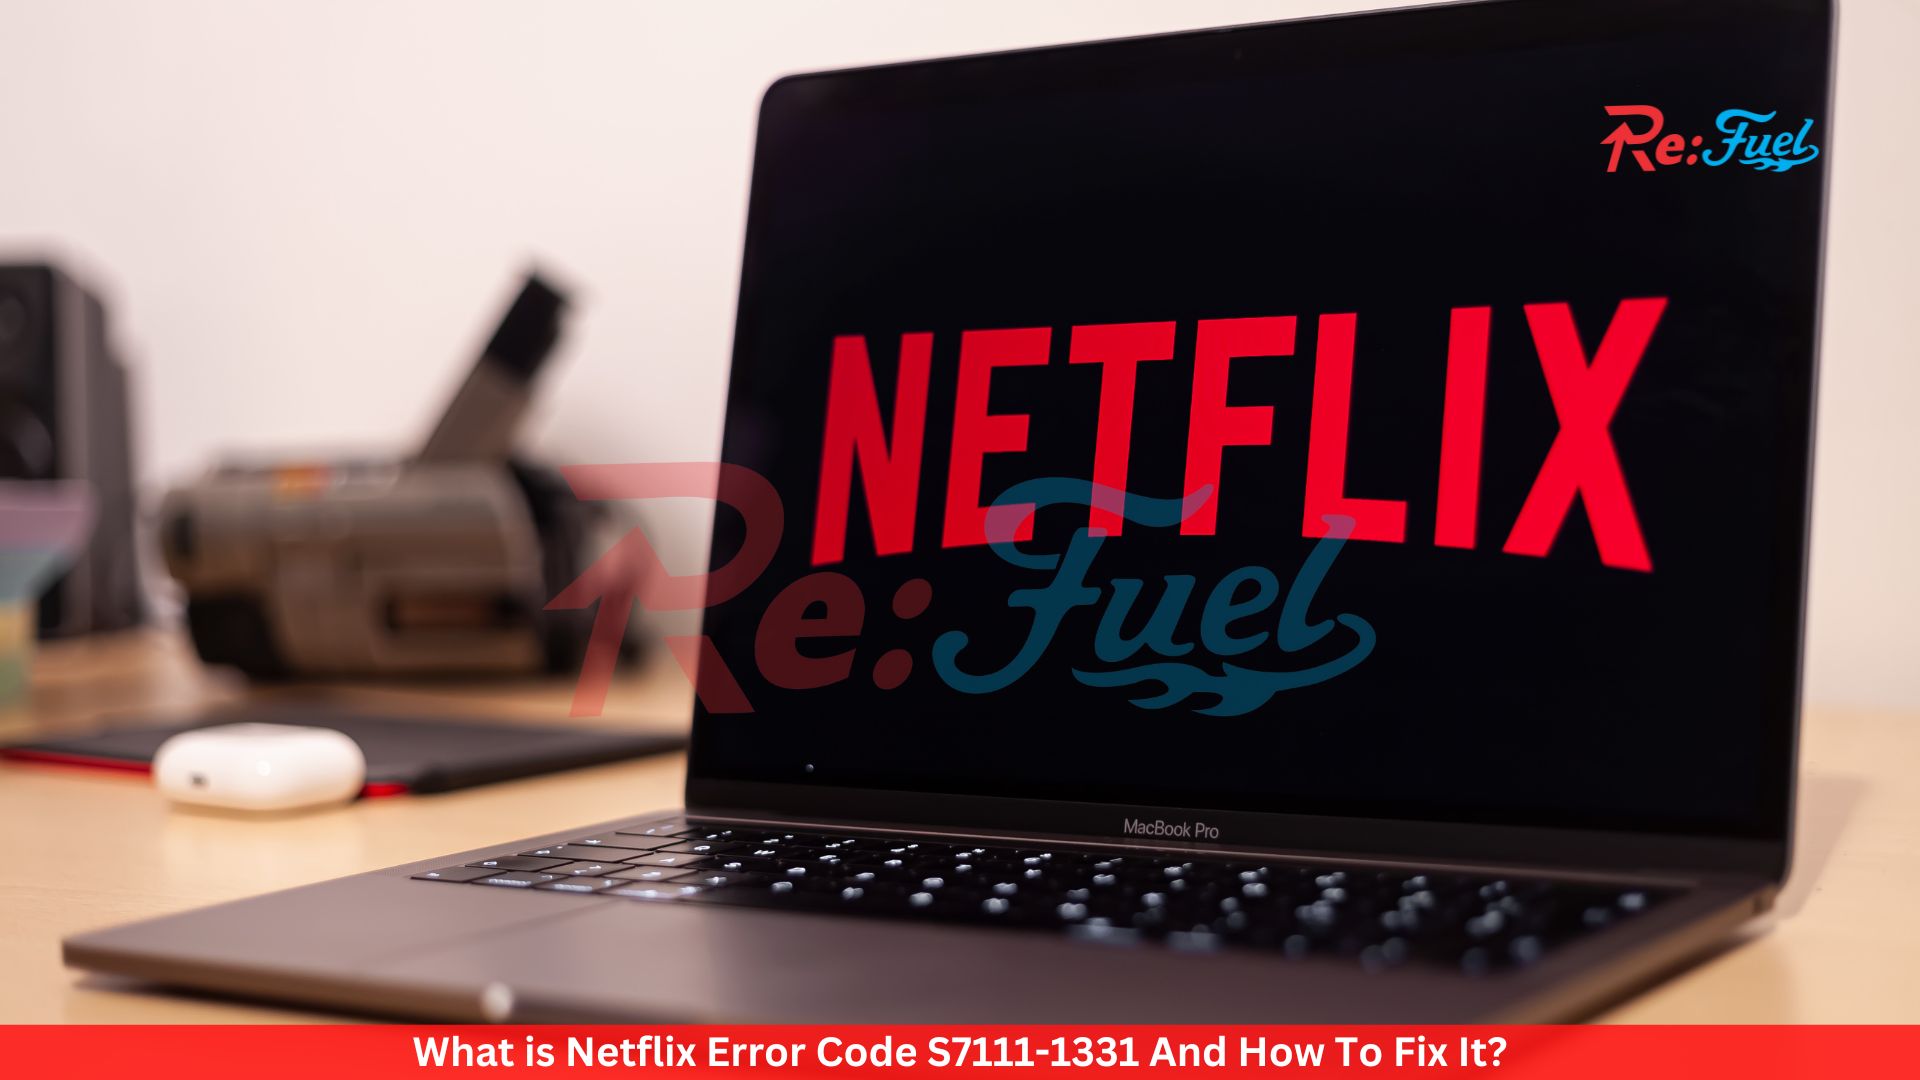 What is Netflix Error Code S7111-1331 And How To Fix It?